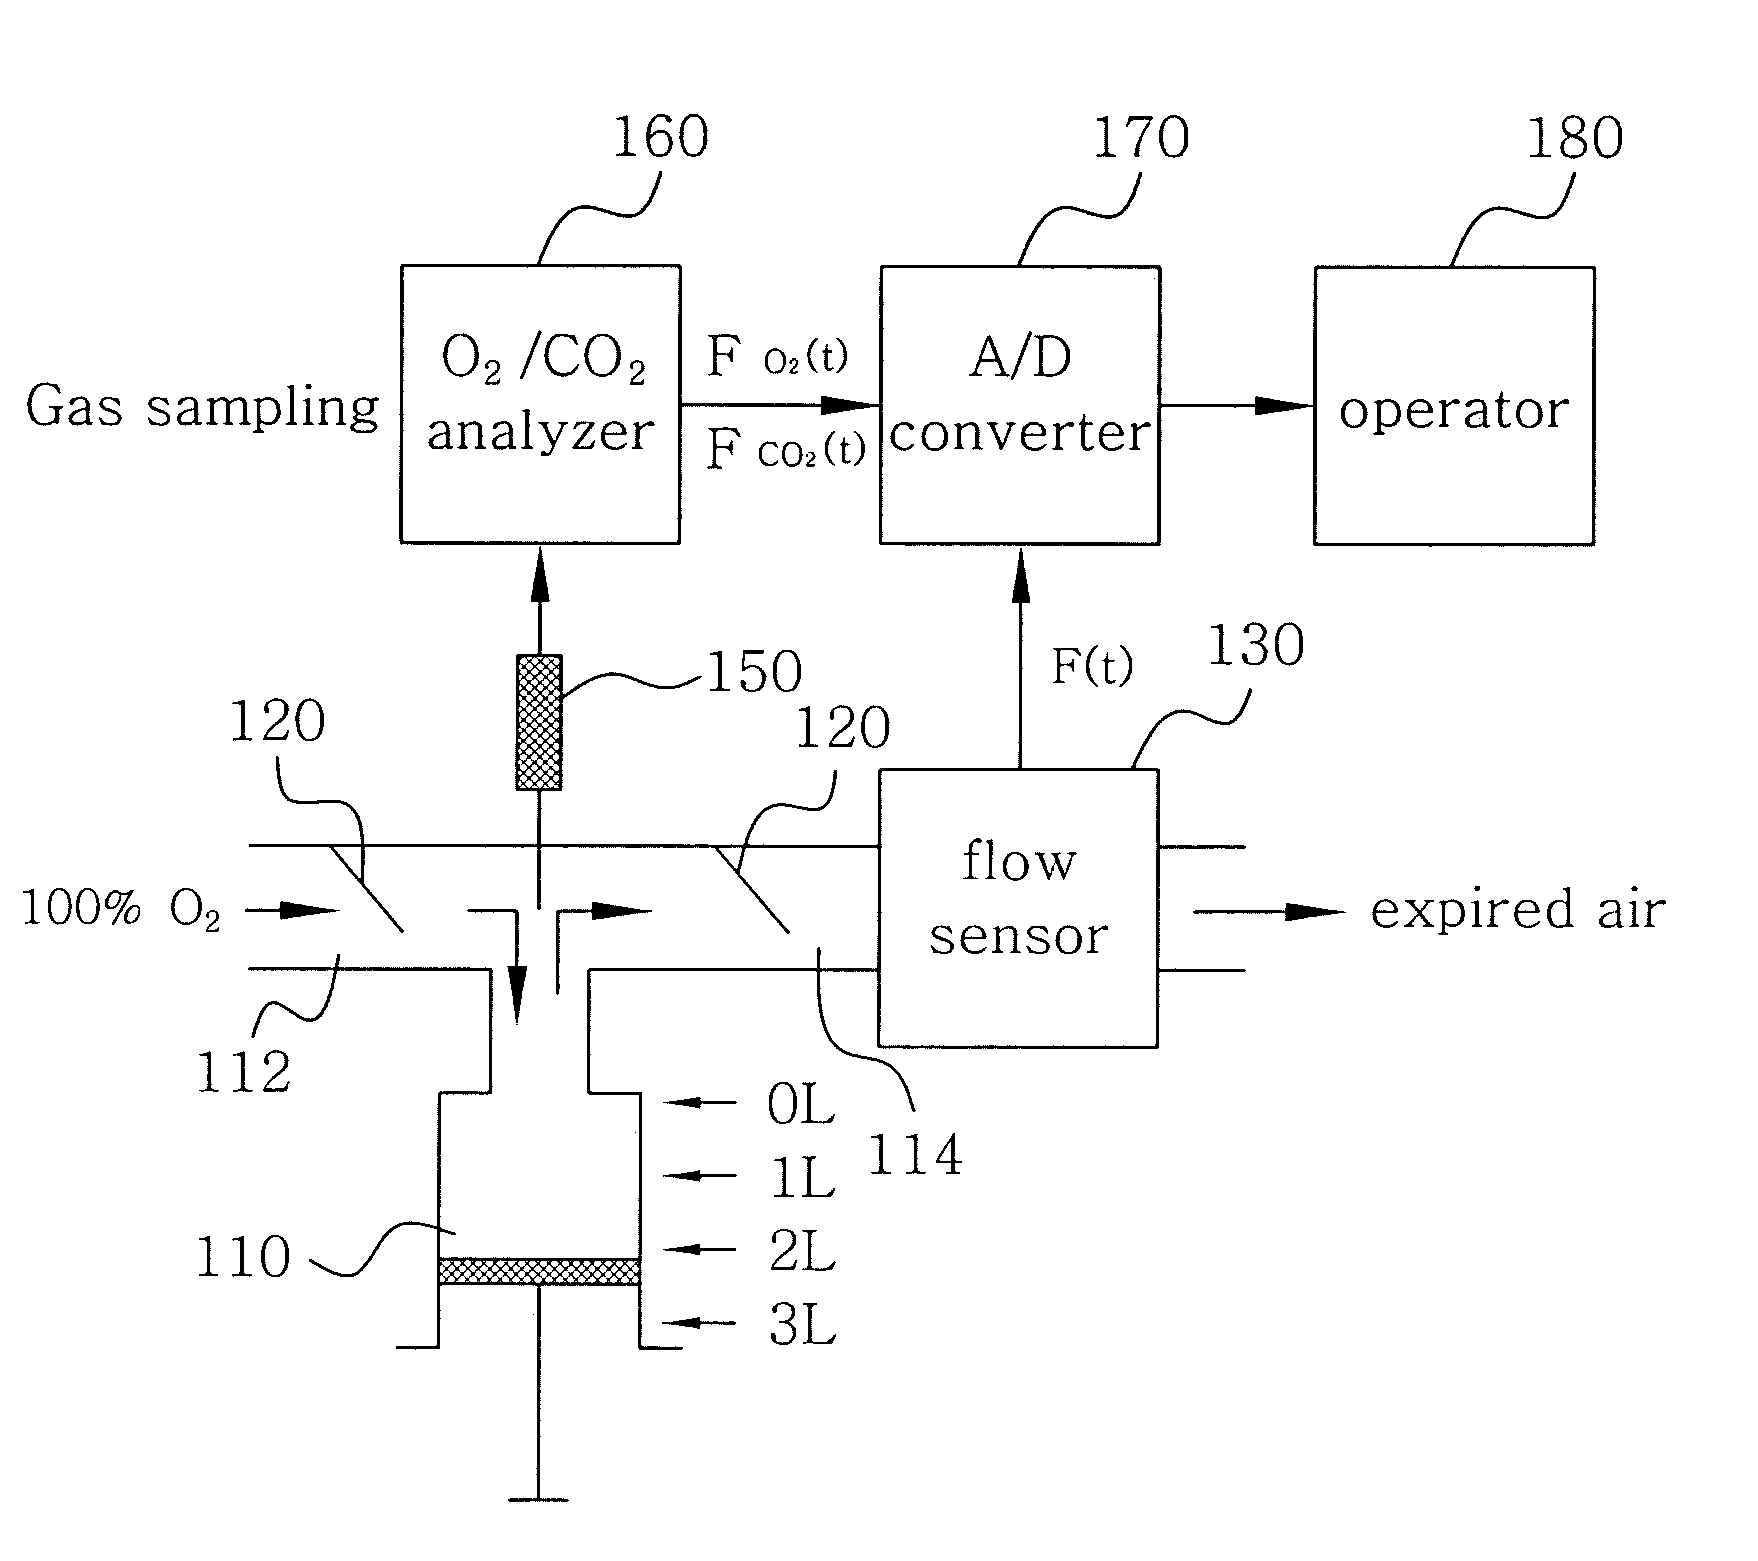 Method of measuring absolute lung volume based on O2/CO2 gas analysis